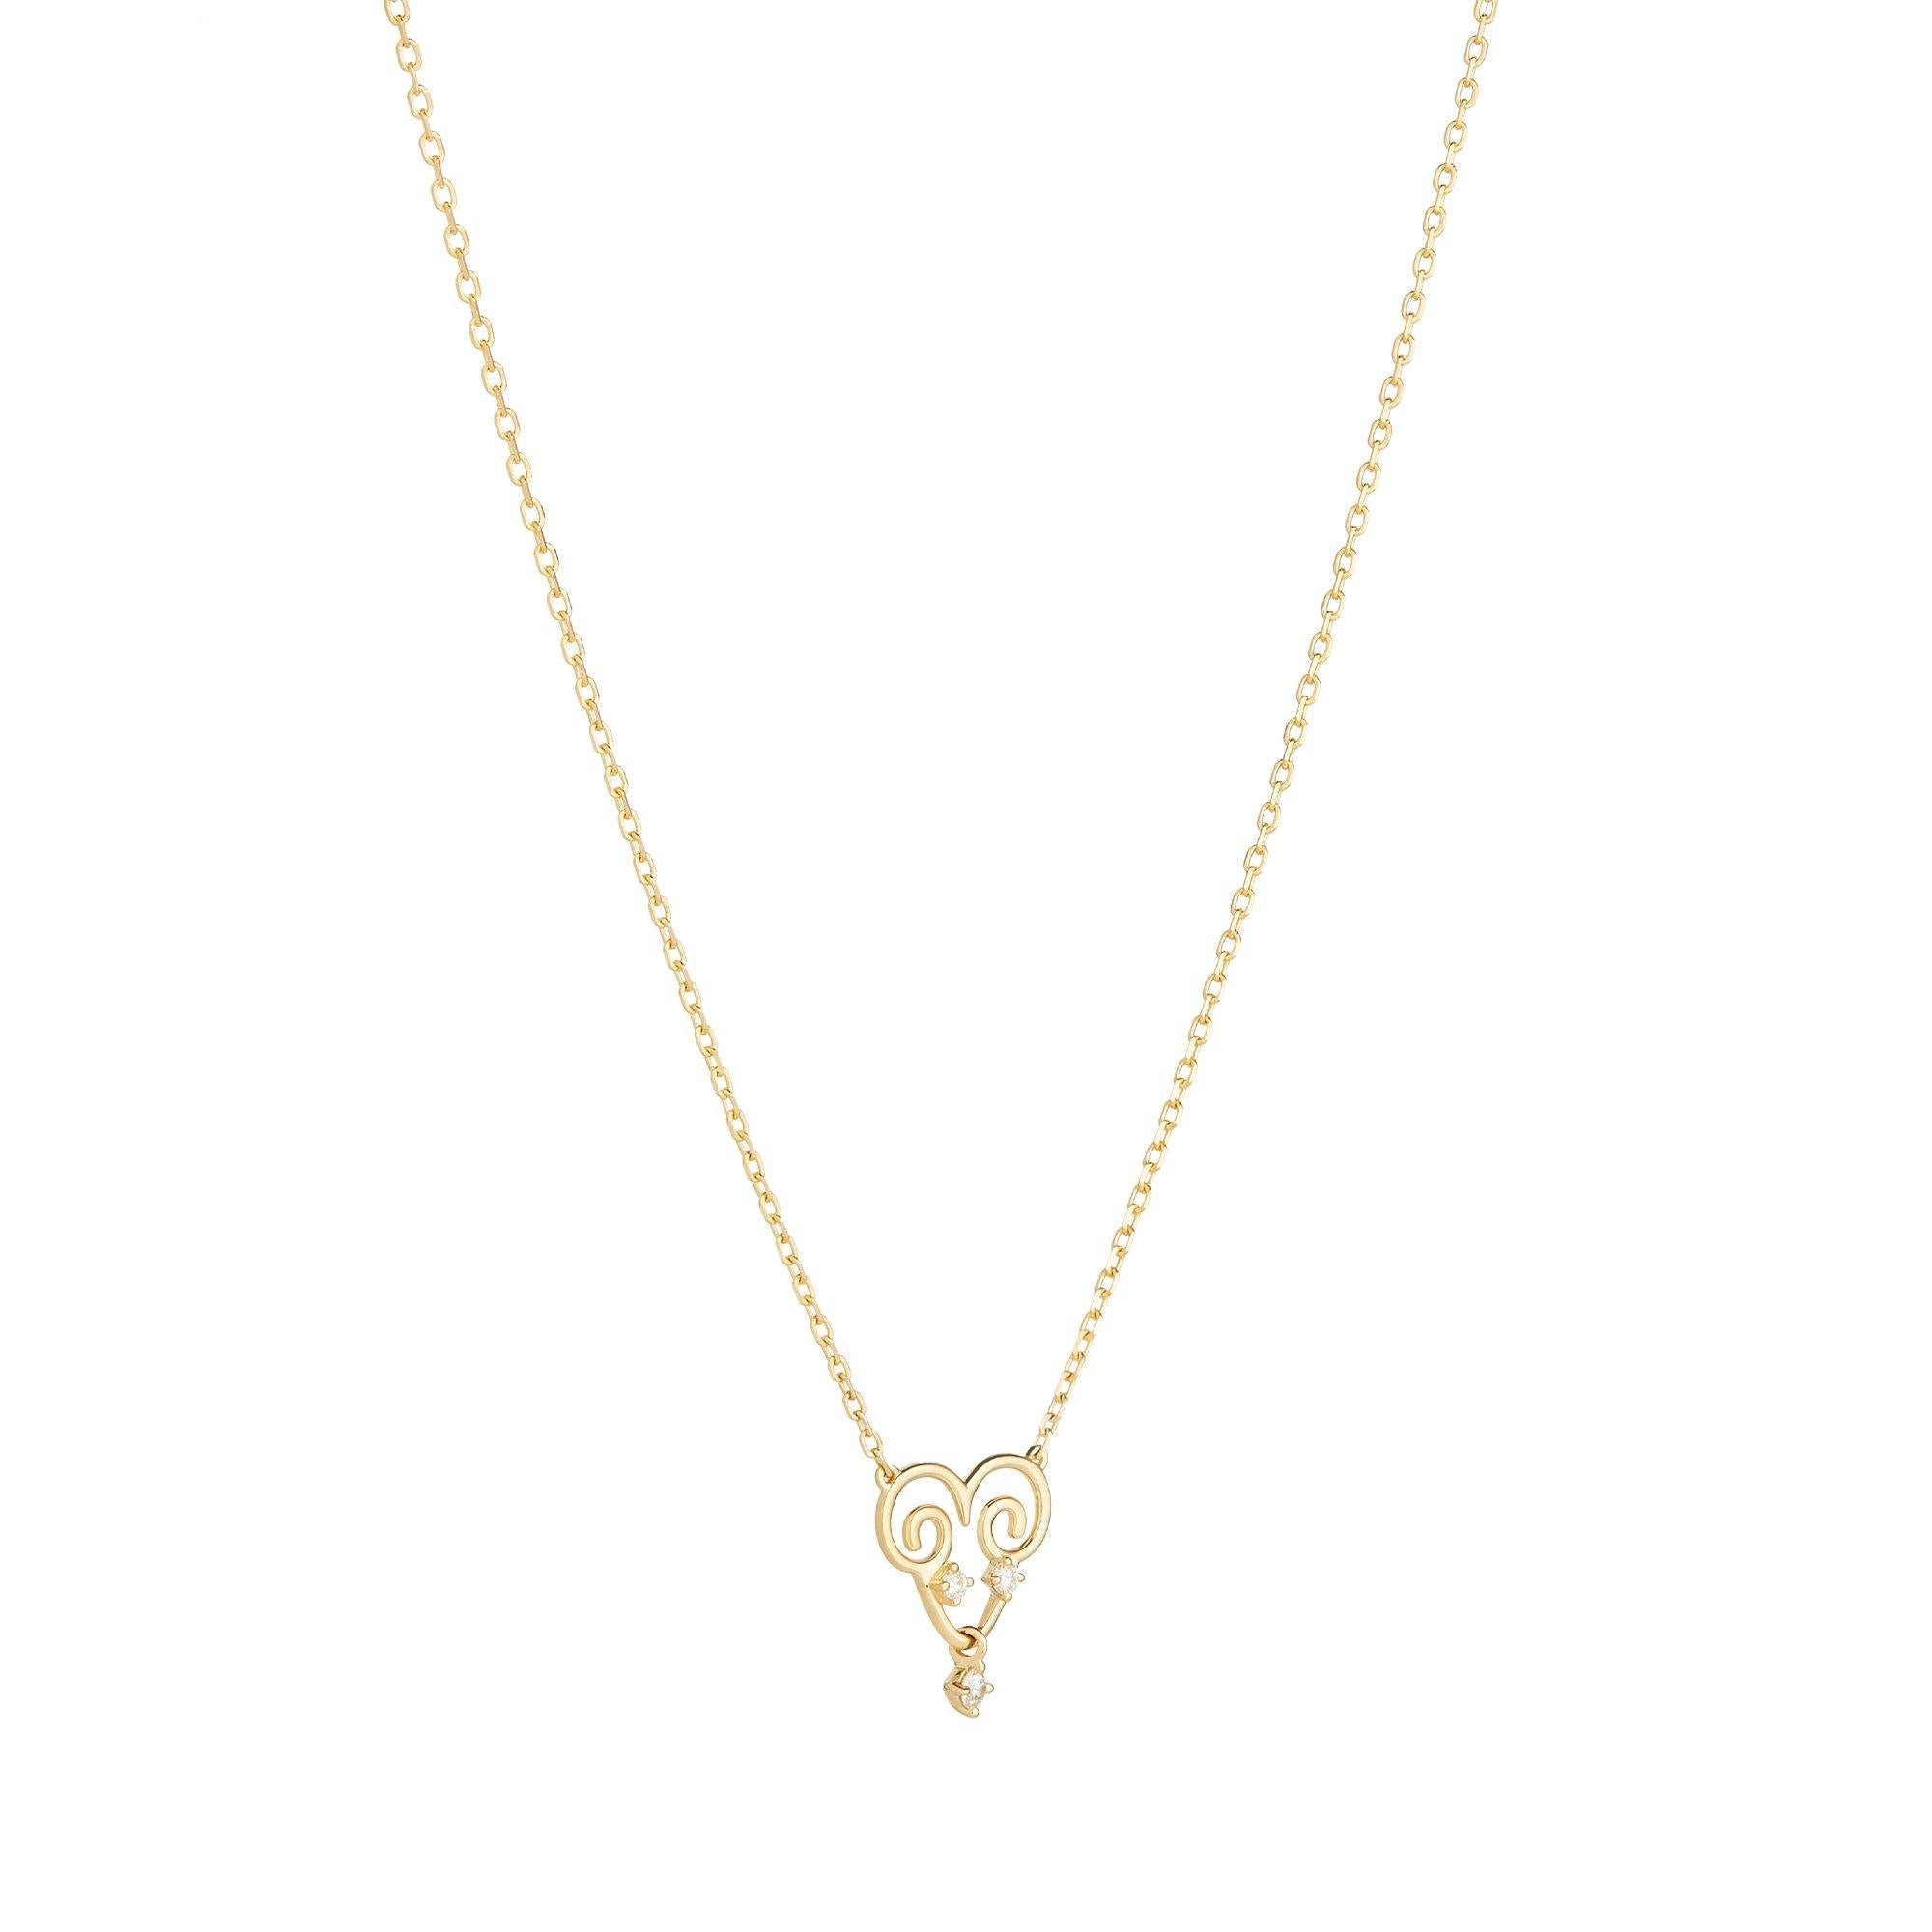 Scintilla Year of the Goat Necklace - RUIFIER